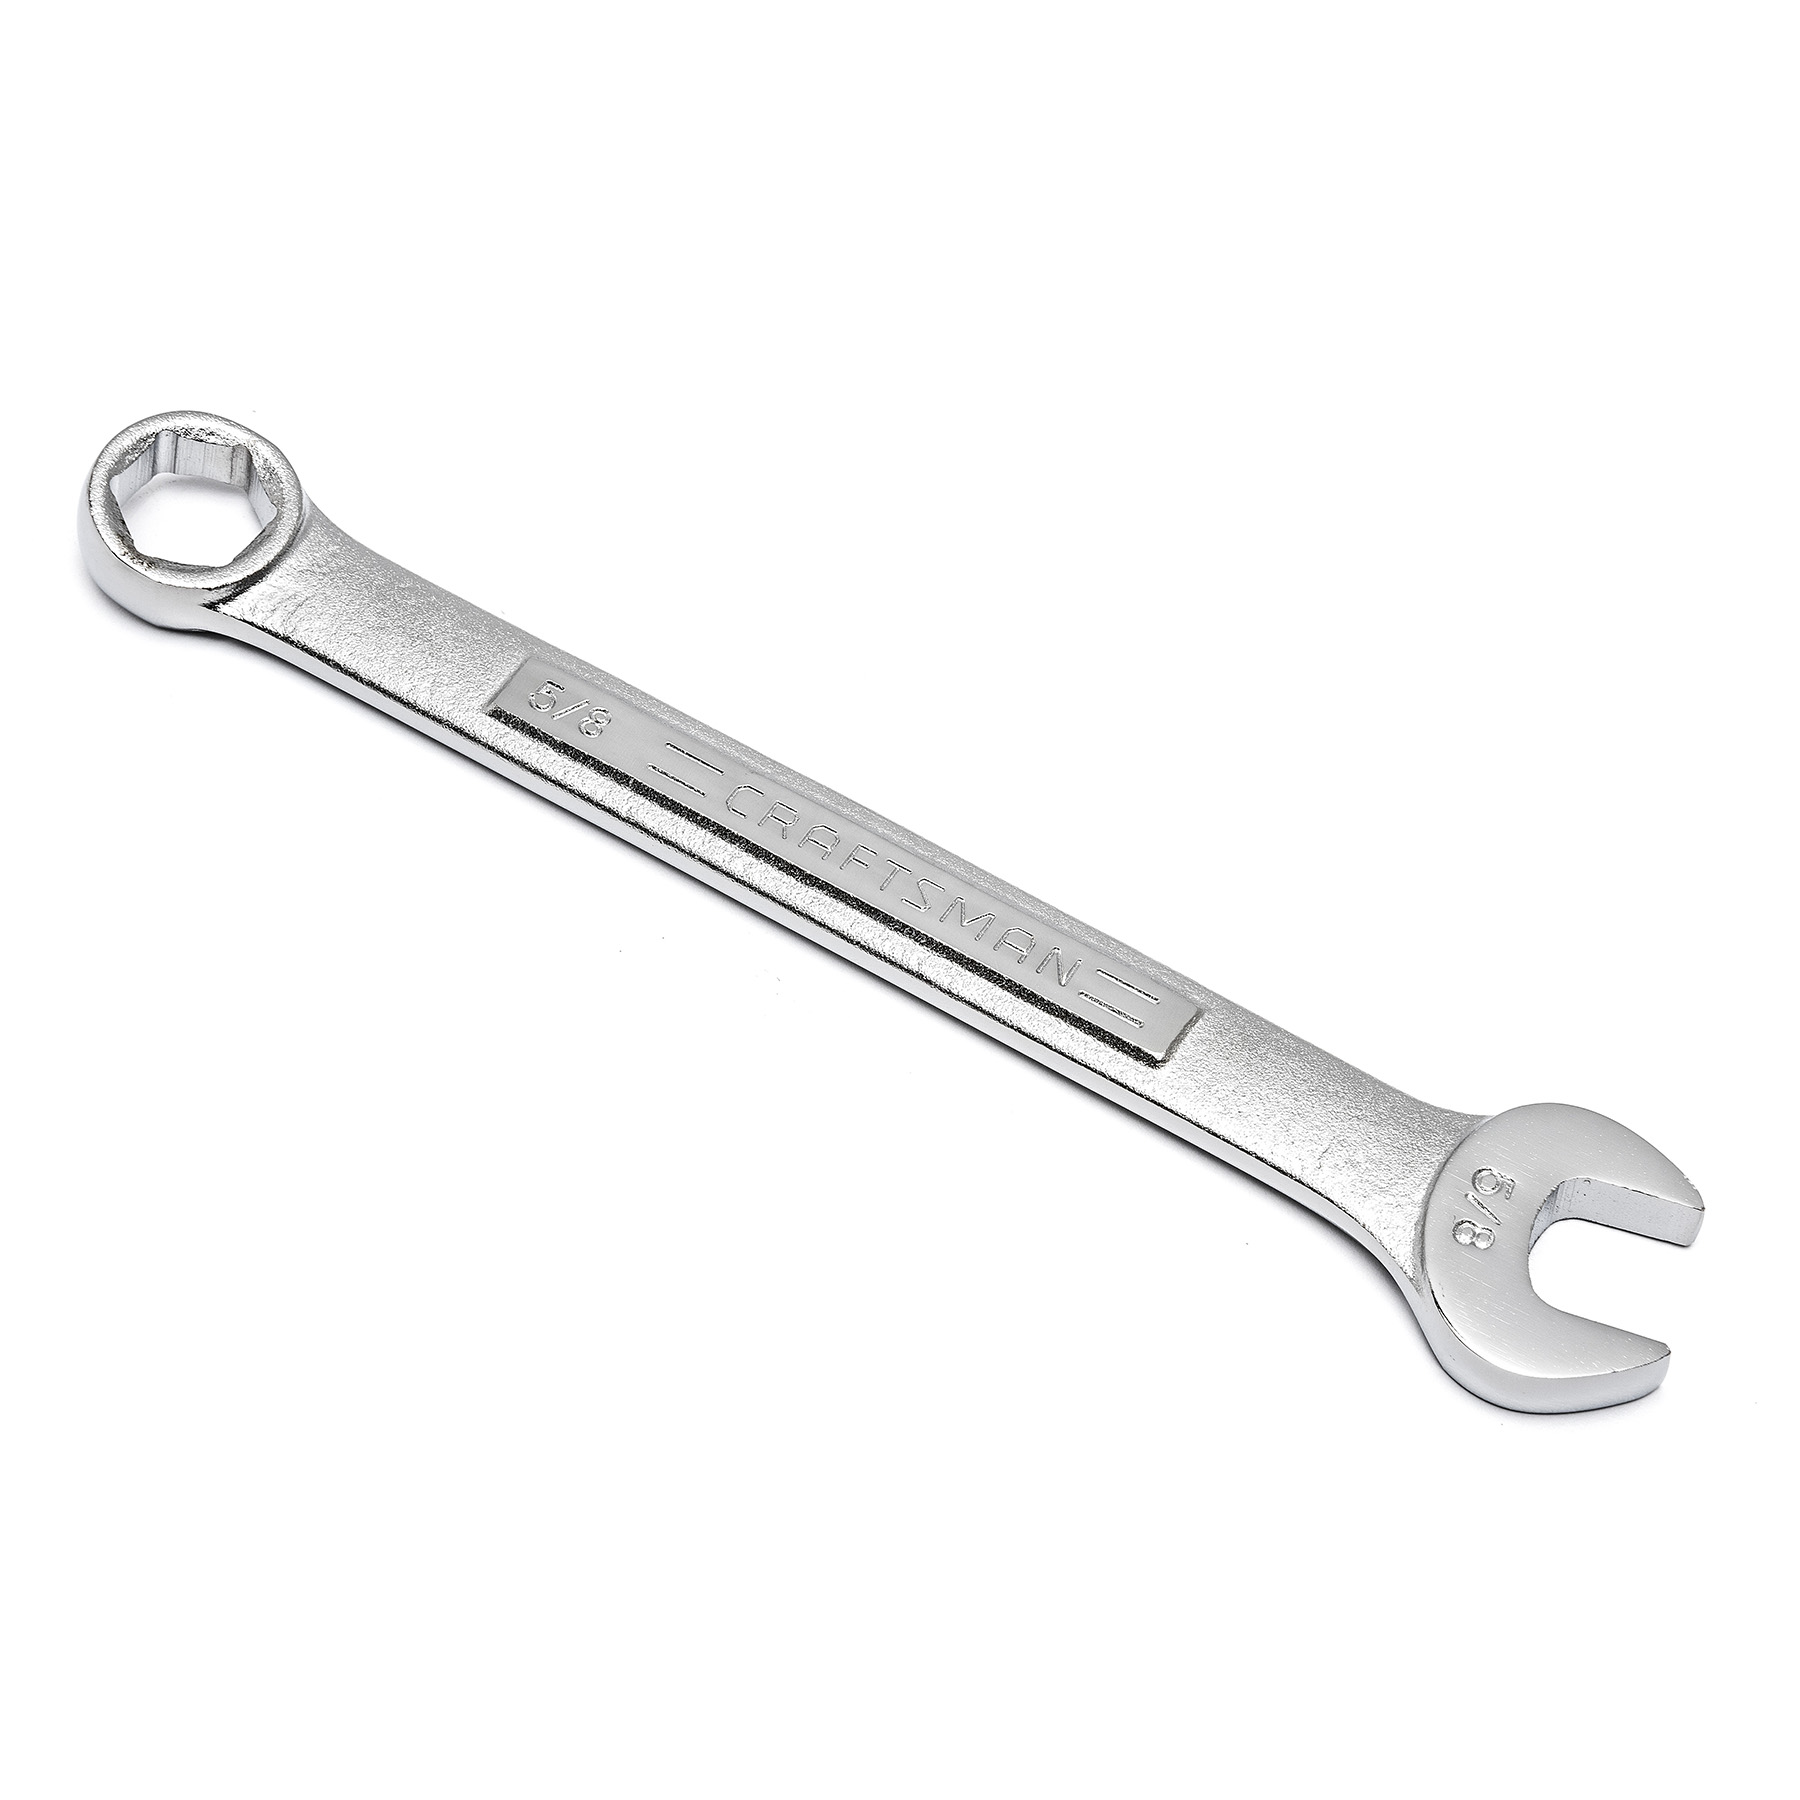 Craftsman 5/8" 6-Point Combination Wrench